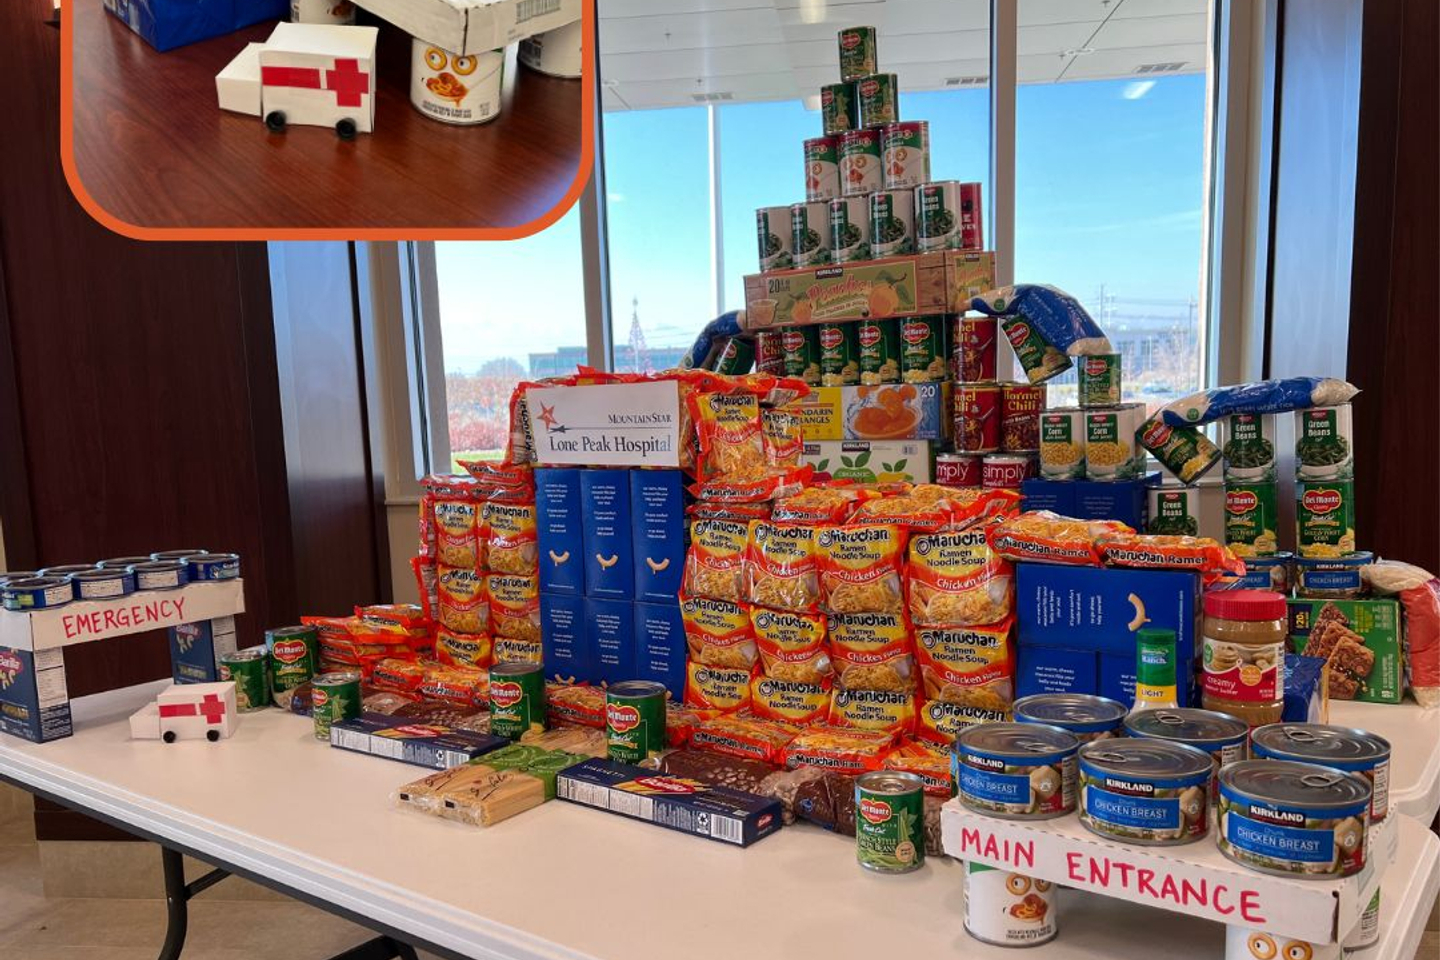 A sculpture of Lone Peak Hospital and the Herriman Emergency Center built out of non-perishable food items